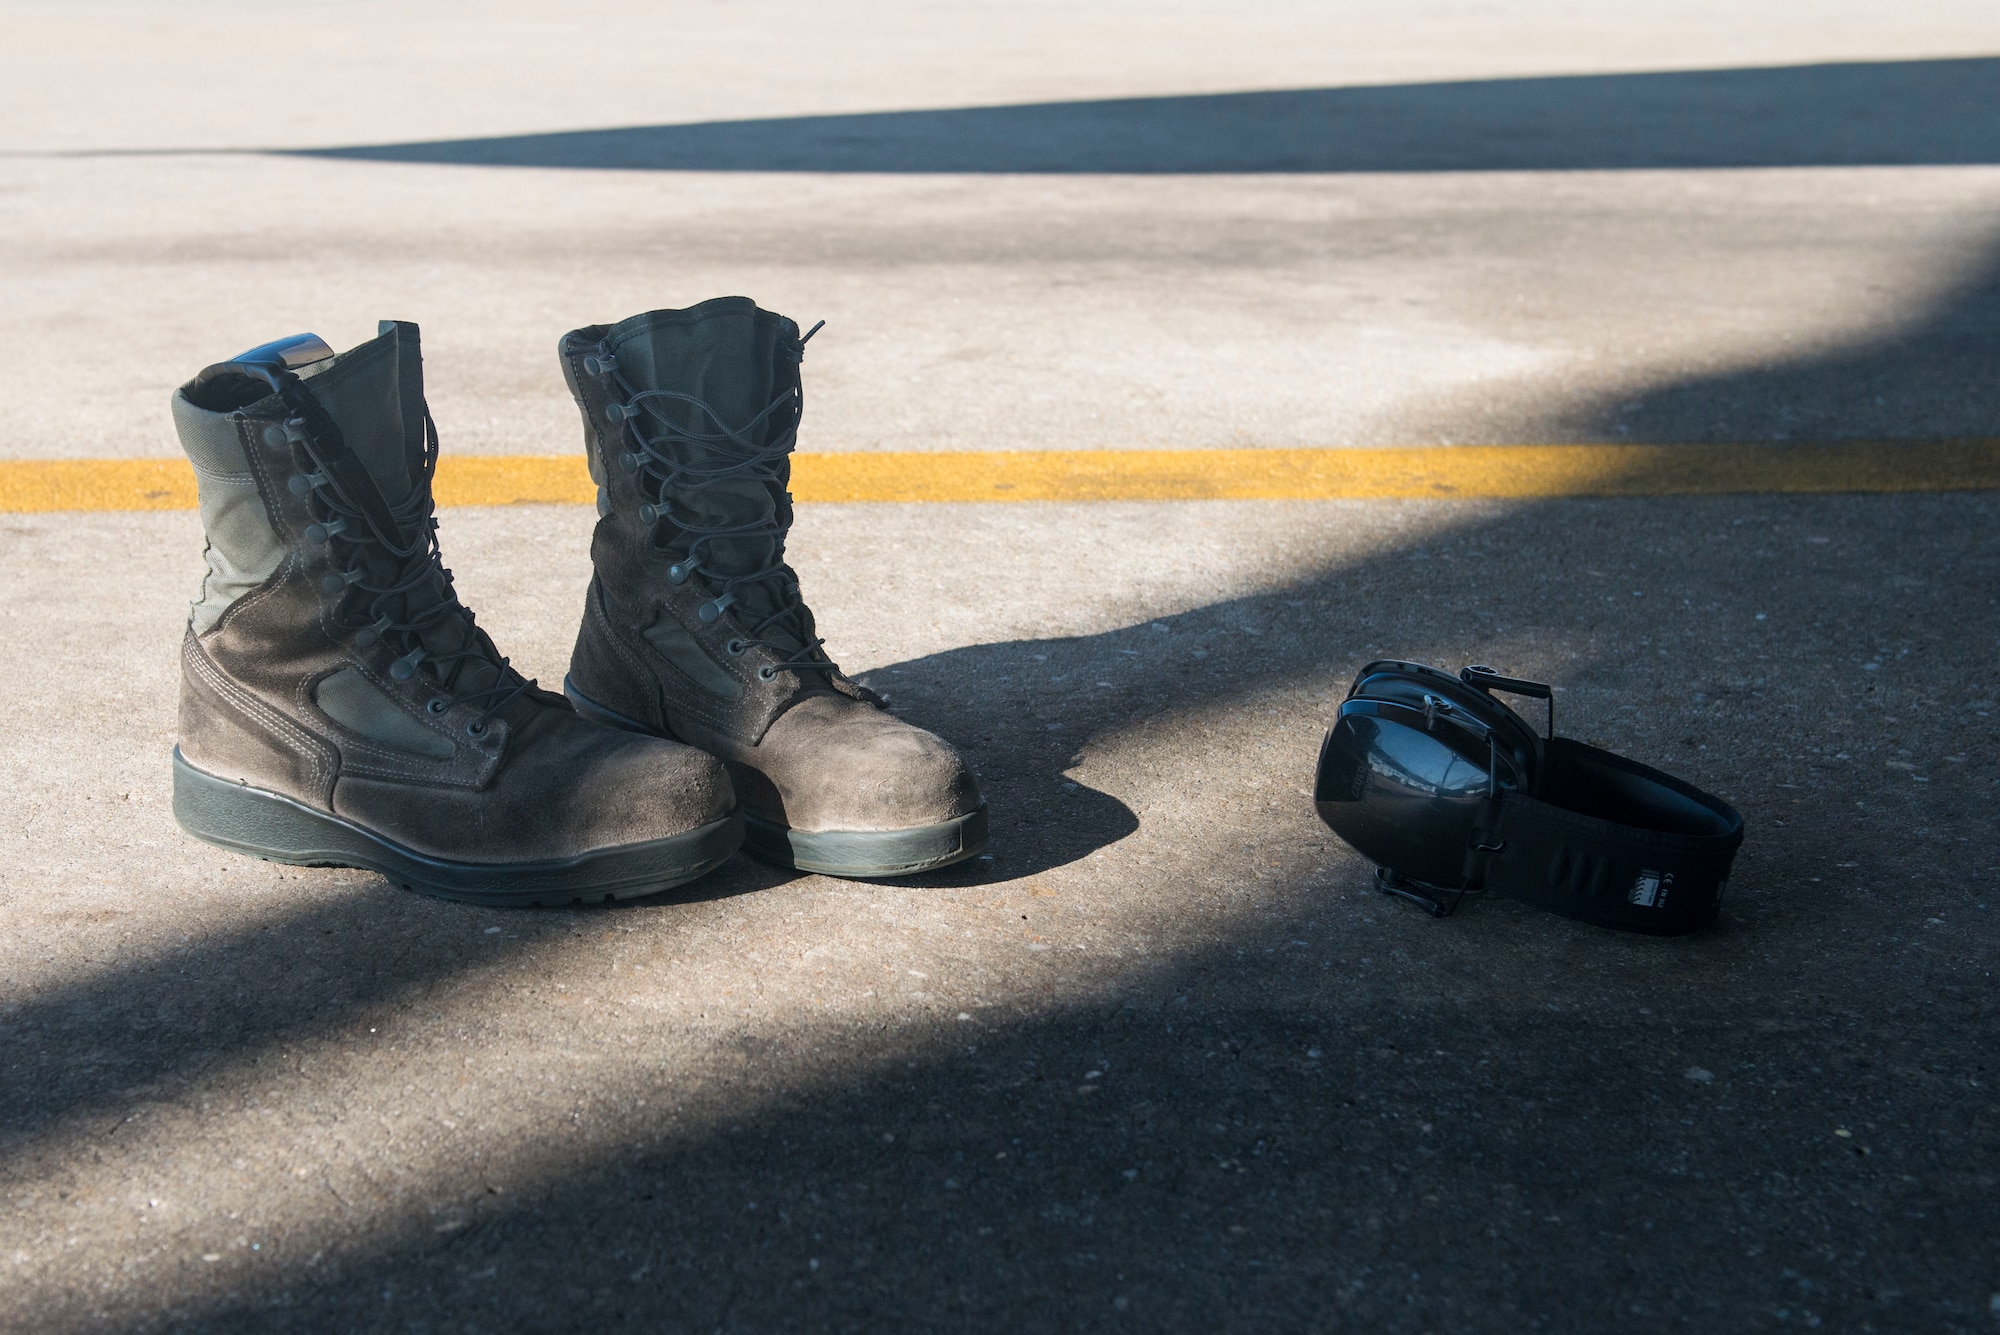 A pair of boots and hearing-protective earphones lie on the ground after being set aside by an Airman prior to climbing into the intake of an F-16CM Fighting Falcon at Shaw Air Force Base, South Carolina, Nov. 16, 2017.